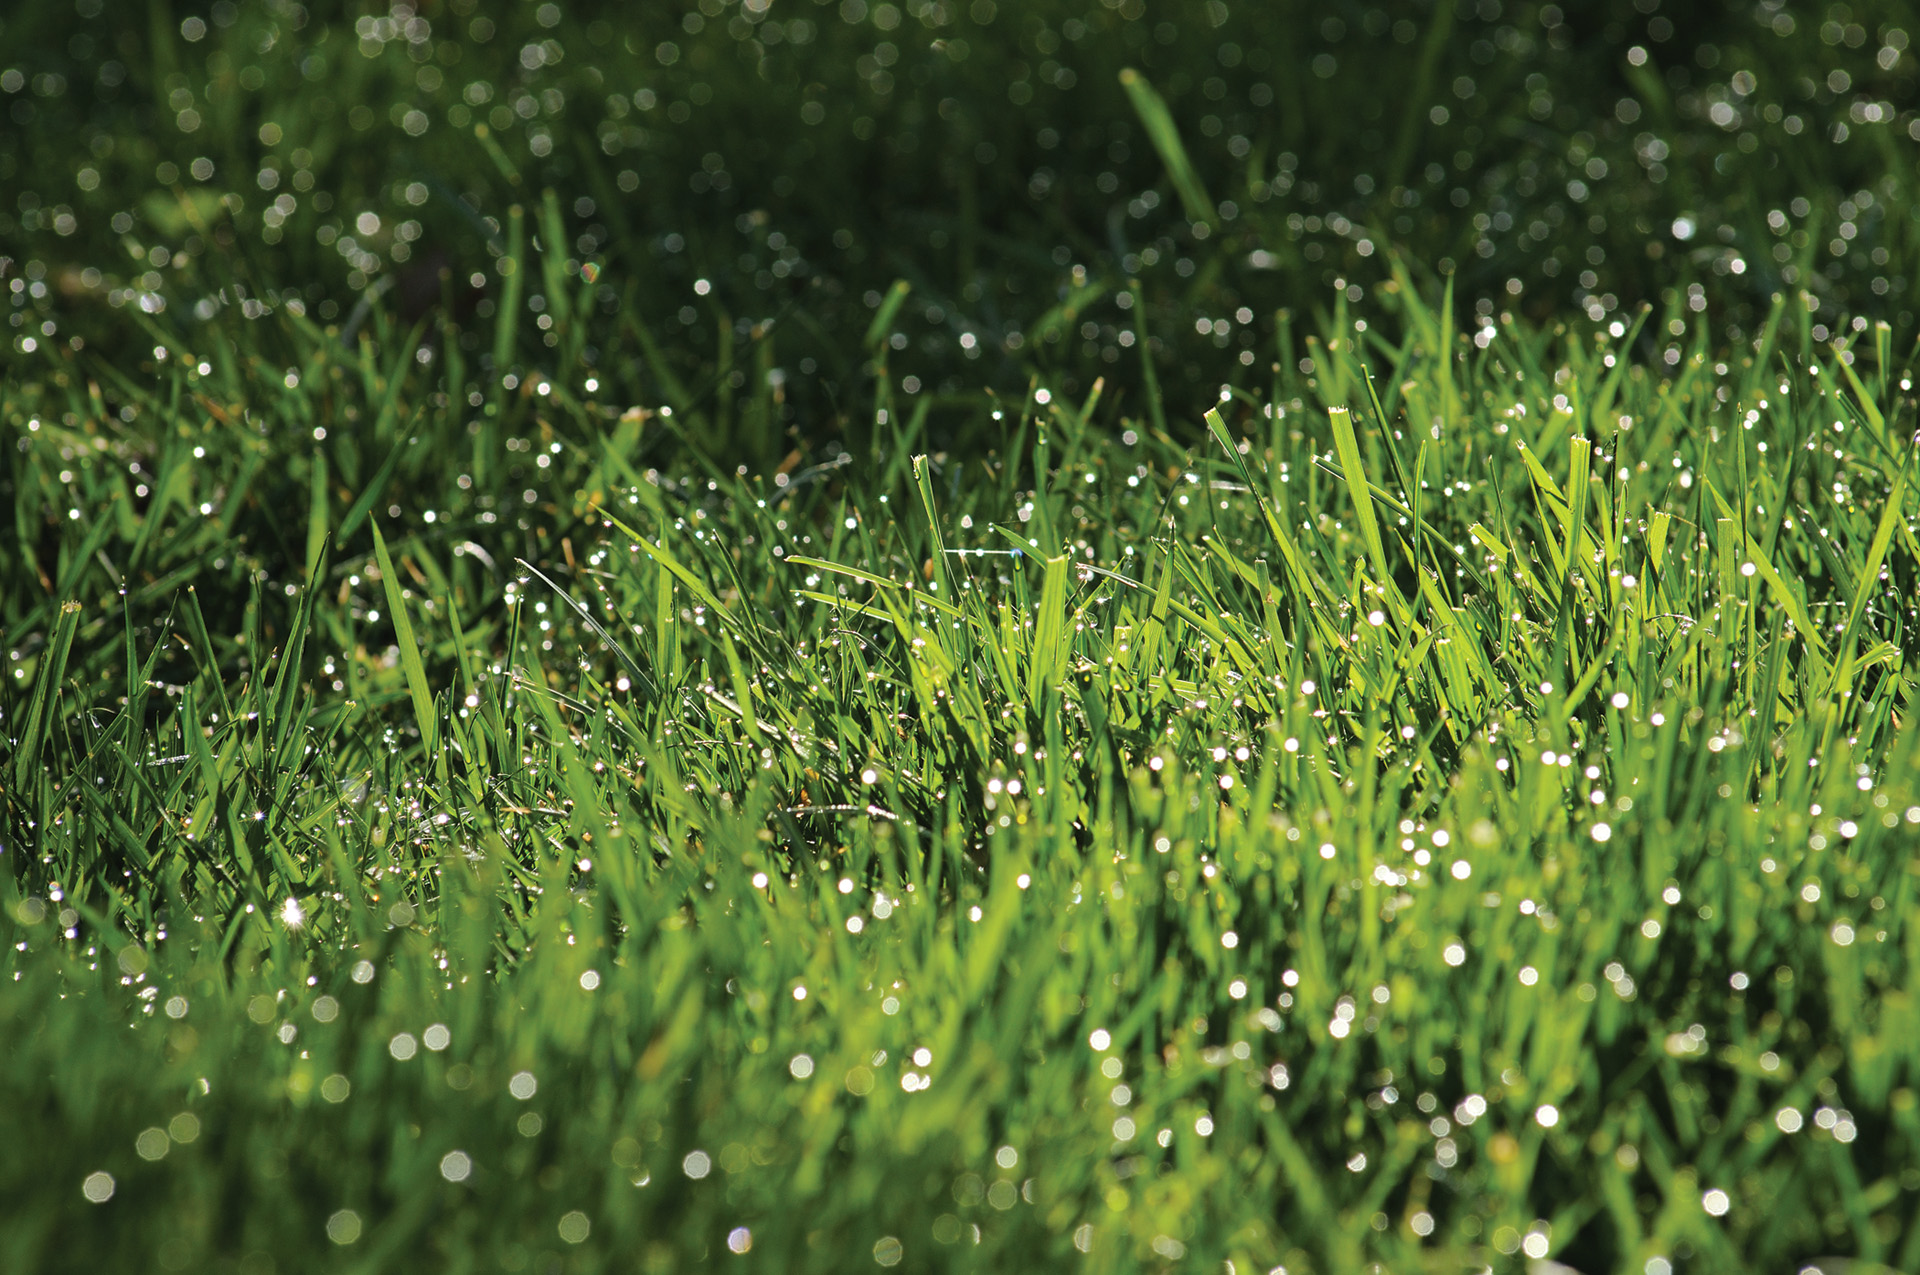 Close-up of grass with dew on it